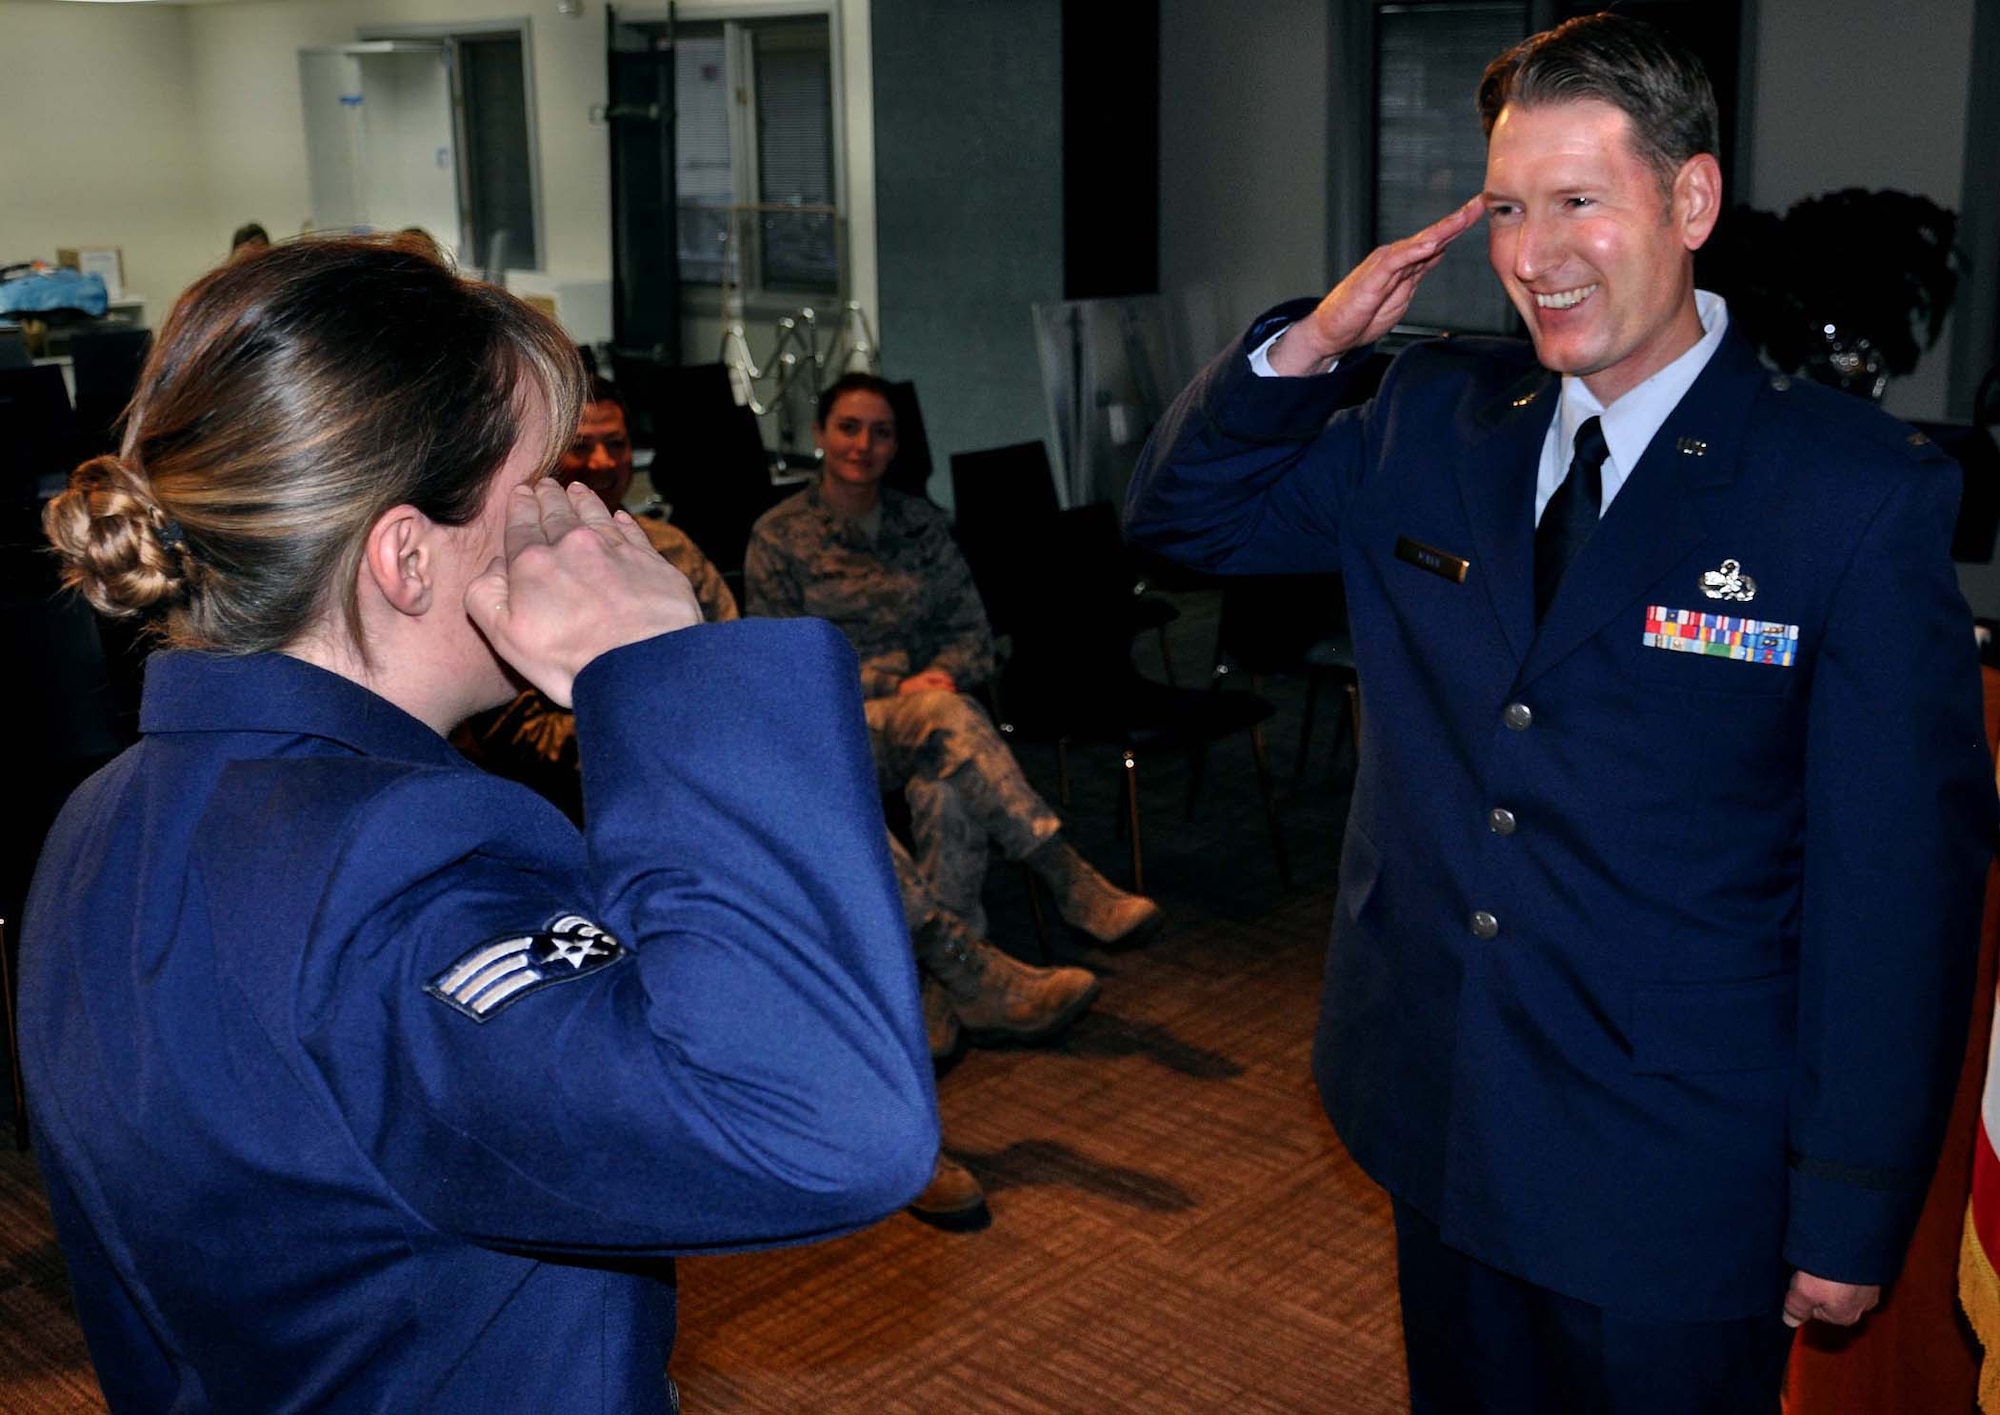 Senior Airman Julie Mann, a health services manager with the 446th Aeromedical Evacuation Squadron here, salutes 2nd Lt. Nathan Mann, Dec. 28.  Lieutenant Mann is a maintenance officer with the 129th Maintenance Group at Moffett Field, Calif.   Airman Mann is saluting her older brother for his first salute as an officer since graduating Officer Training School. (U.S. Air Force Photo/Airman 1st Class Madelyn McCullough)